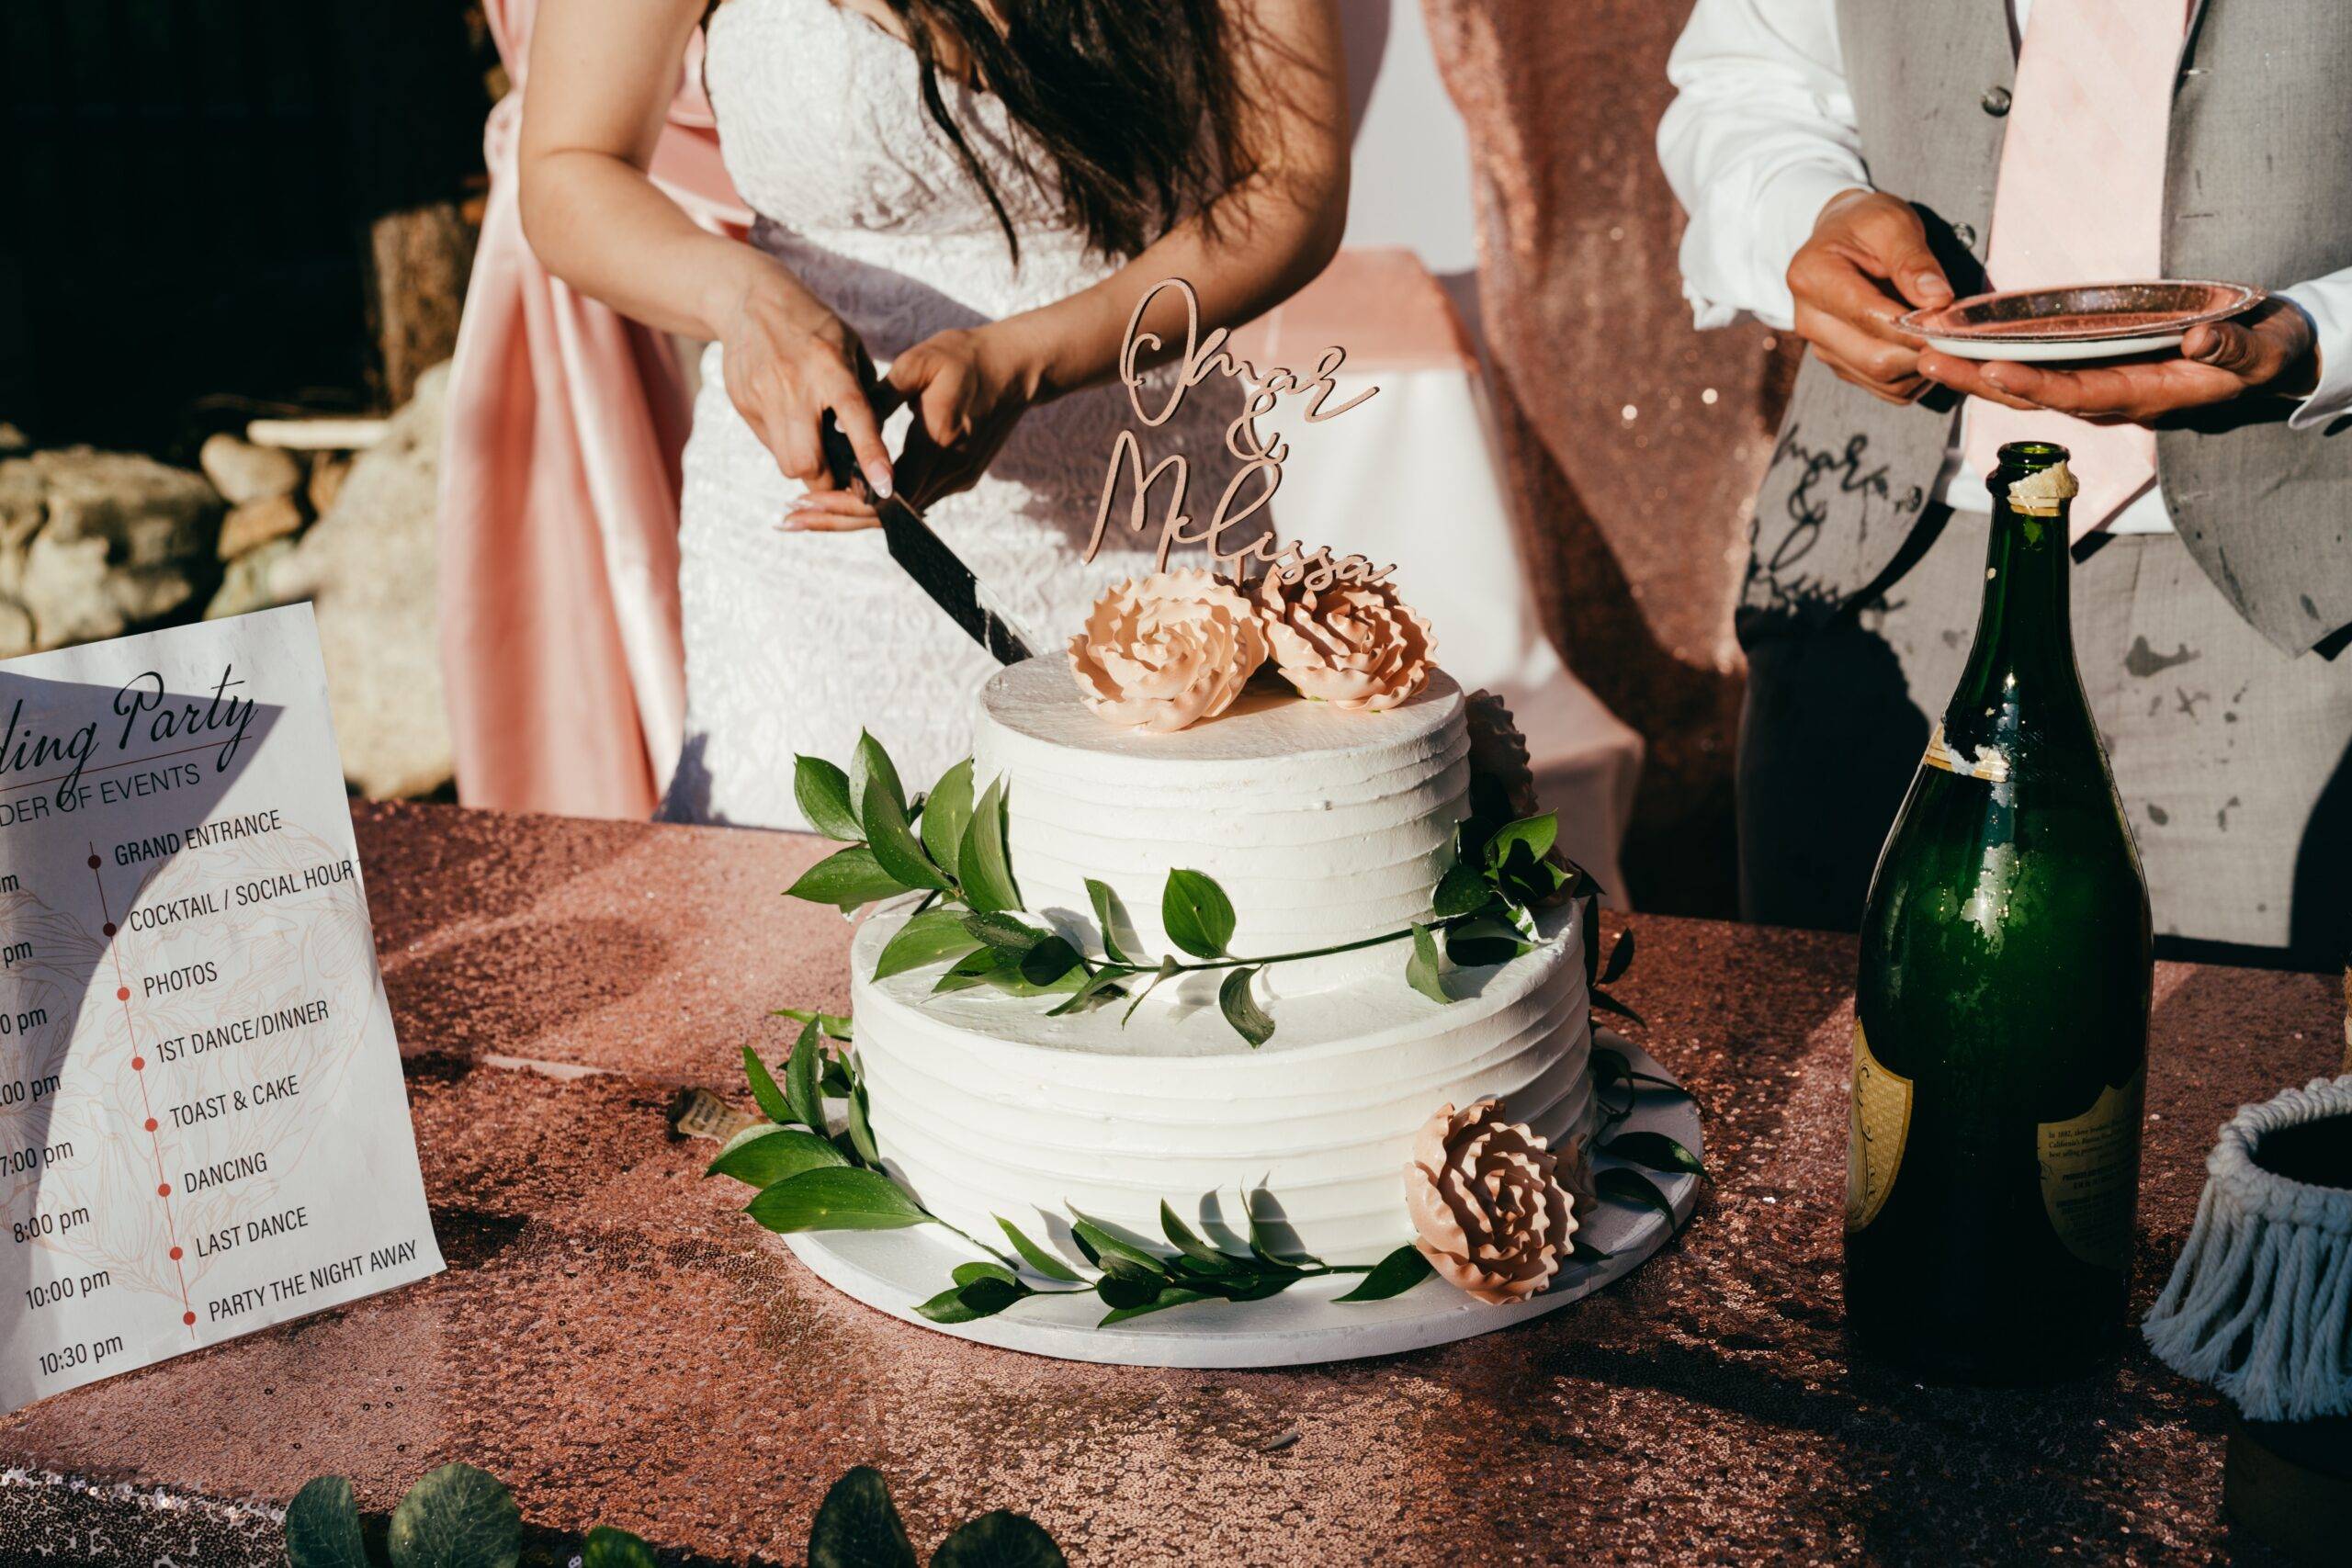 The Best Ingredients and Techniques to Bake a Wedding Cake